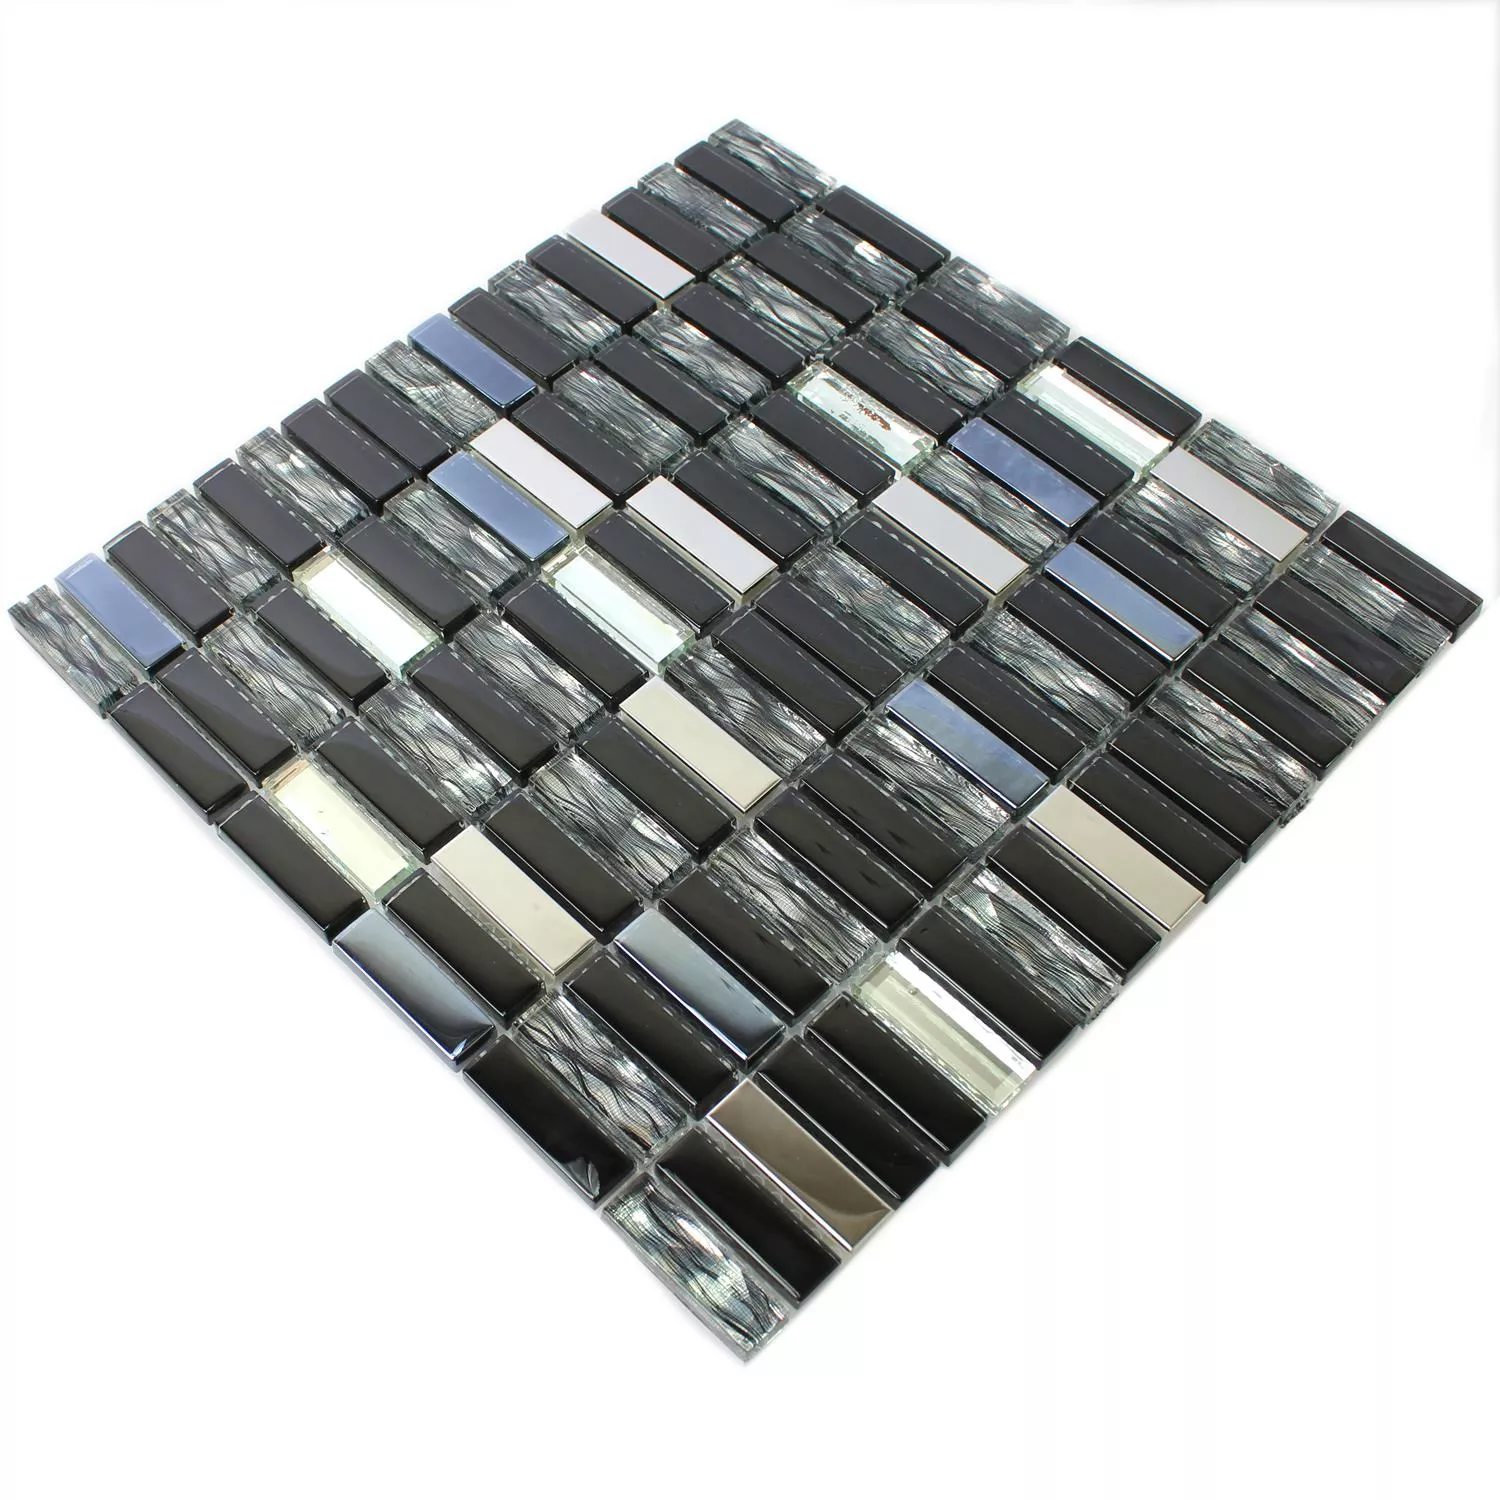 Mosaic Tiles Glass Stainless Steel Black Mix